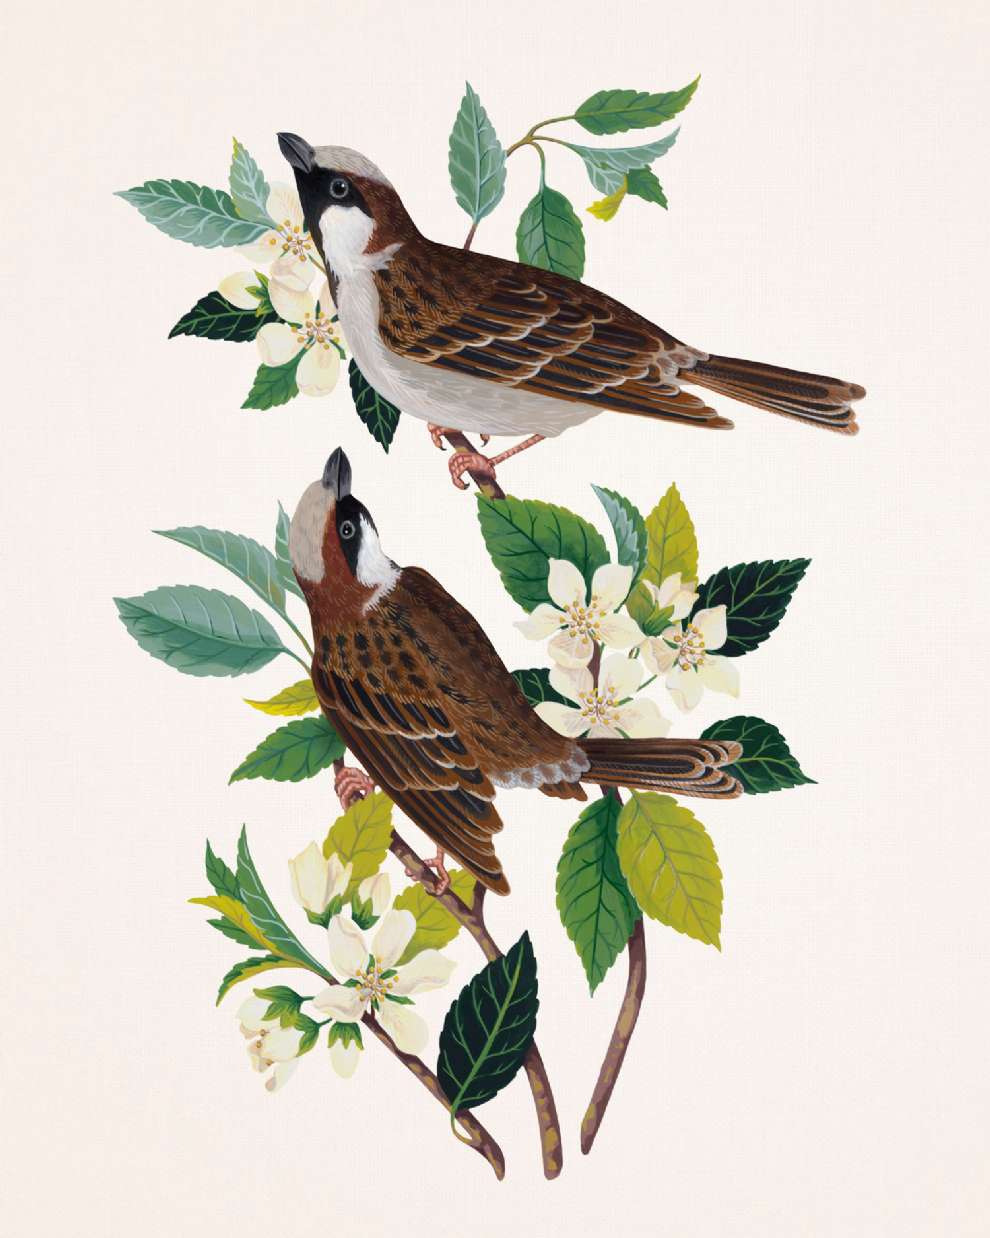 Charlotte Day, Delicately handpainted birds on branches with white flowers